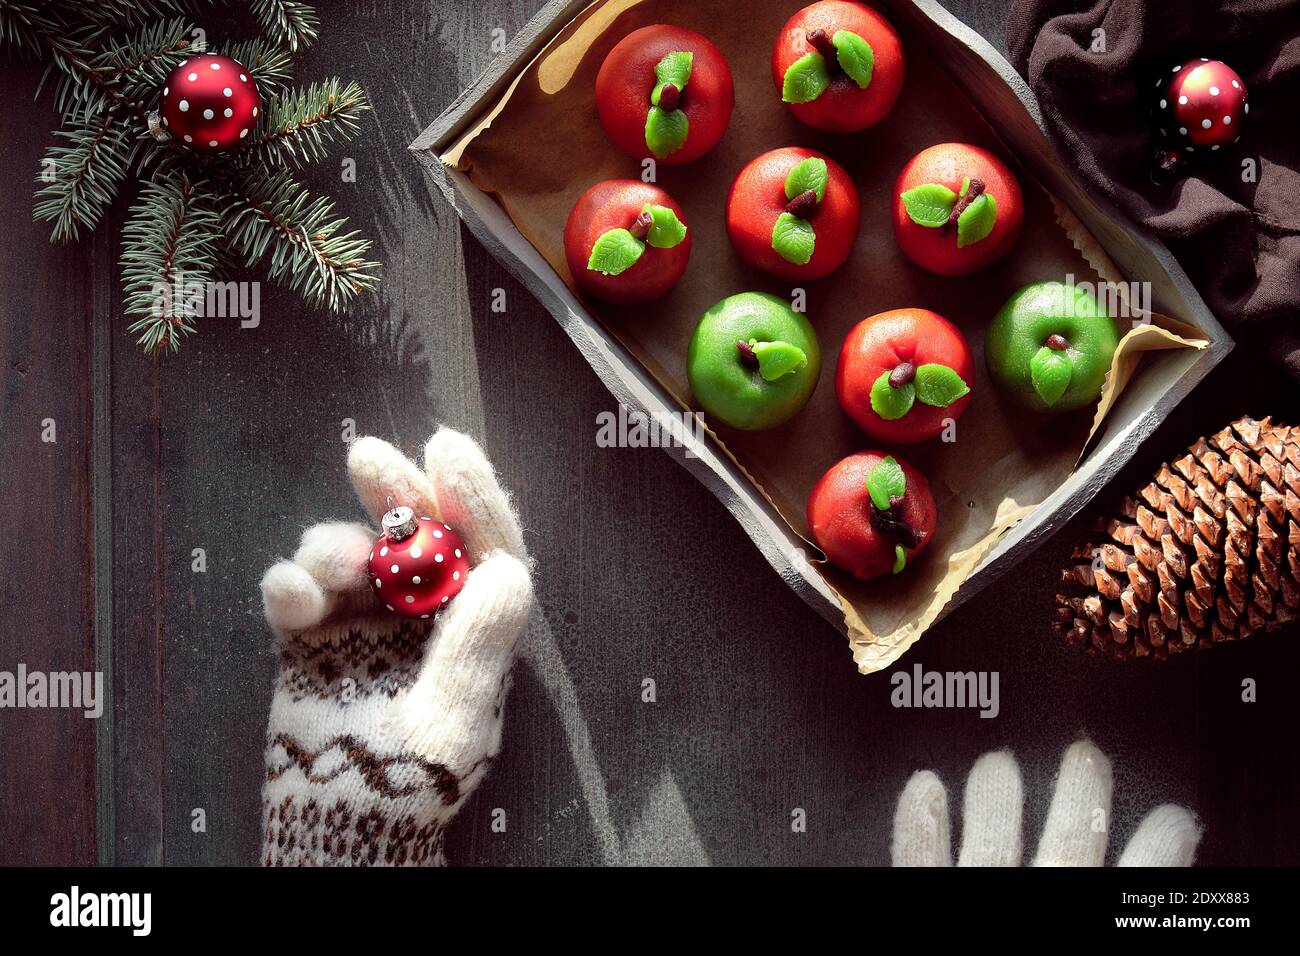 Marzipan sponge apples. Tasty creative dessert on rustic wooden tray with textile cotton towel. Hands in wool gloves. Stock Photo